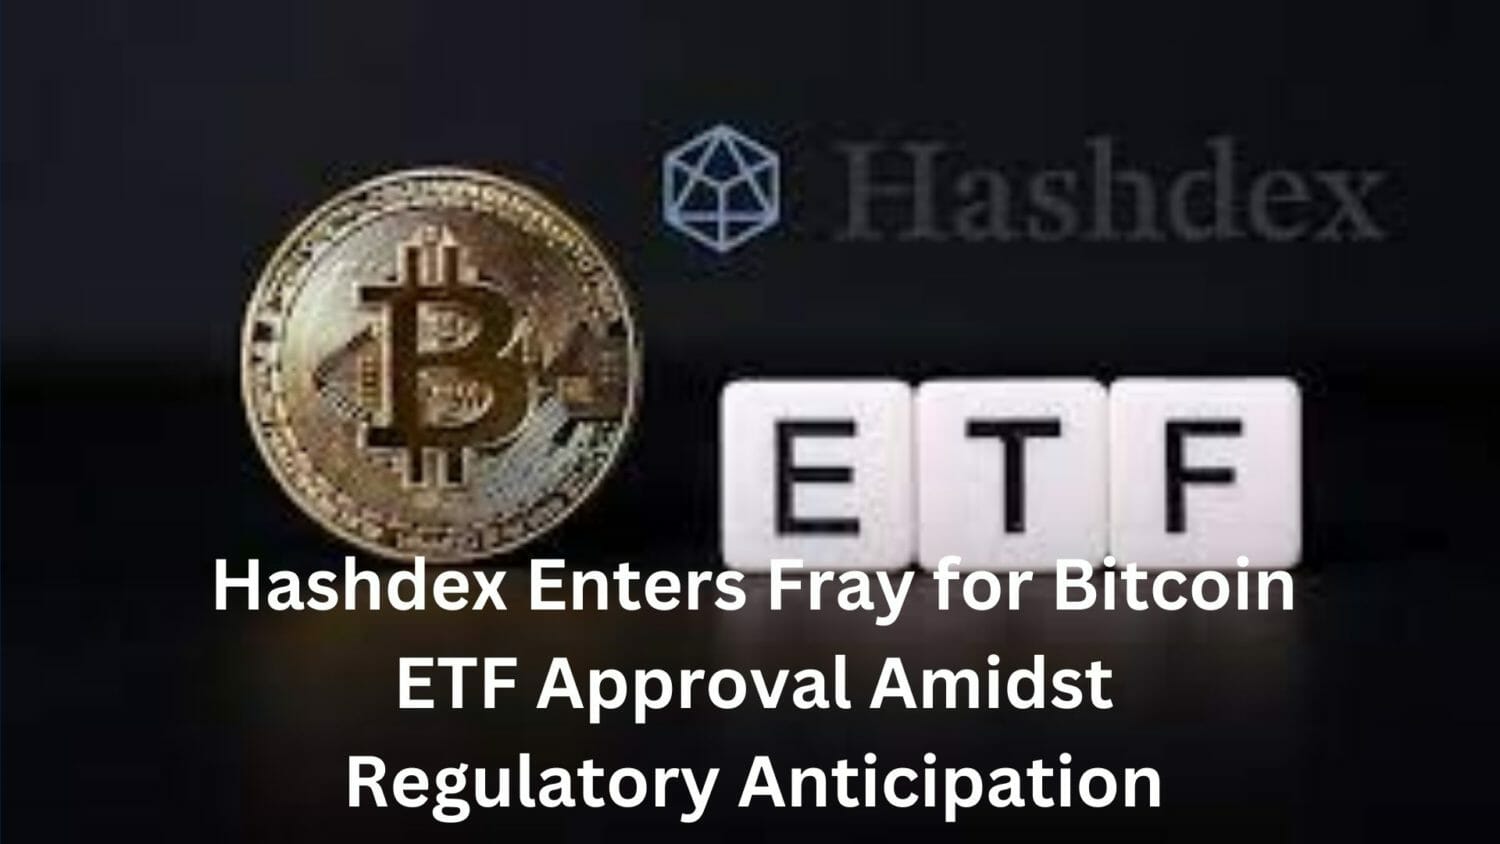 Hashdex Enters Fray For Bitcoin Etf Approval Amidst Regulatory Anticipation